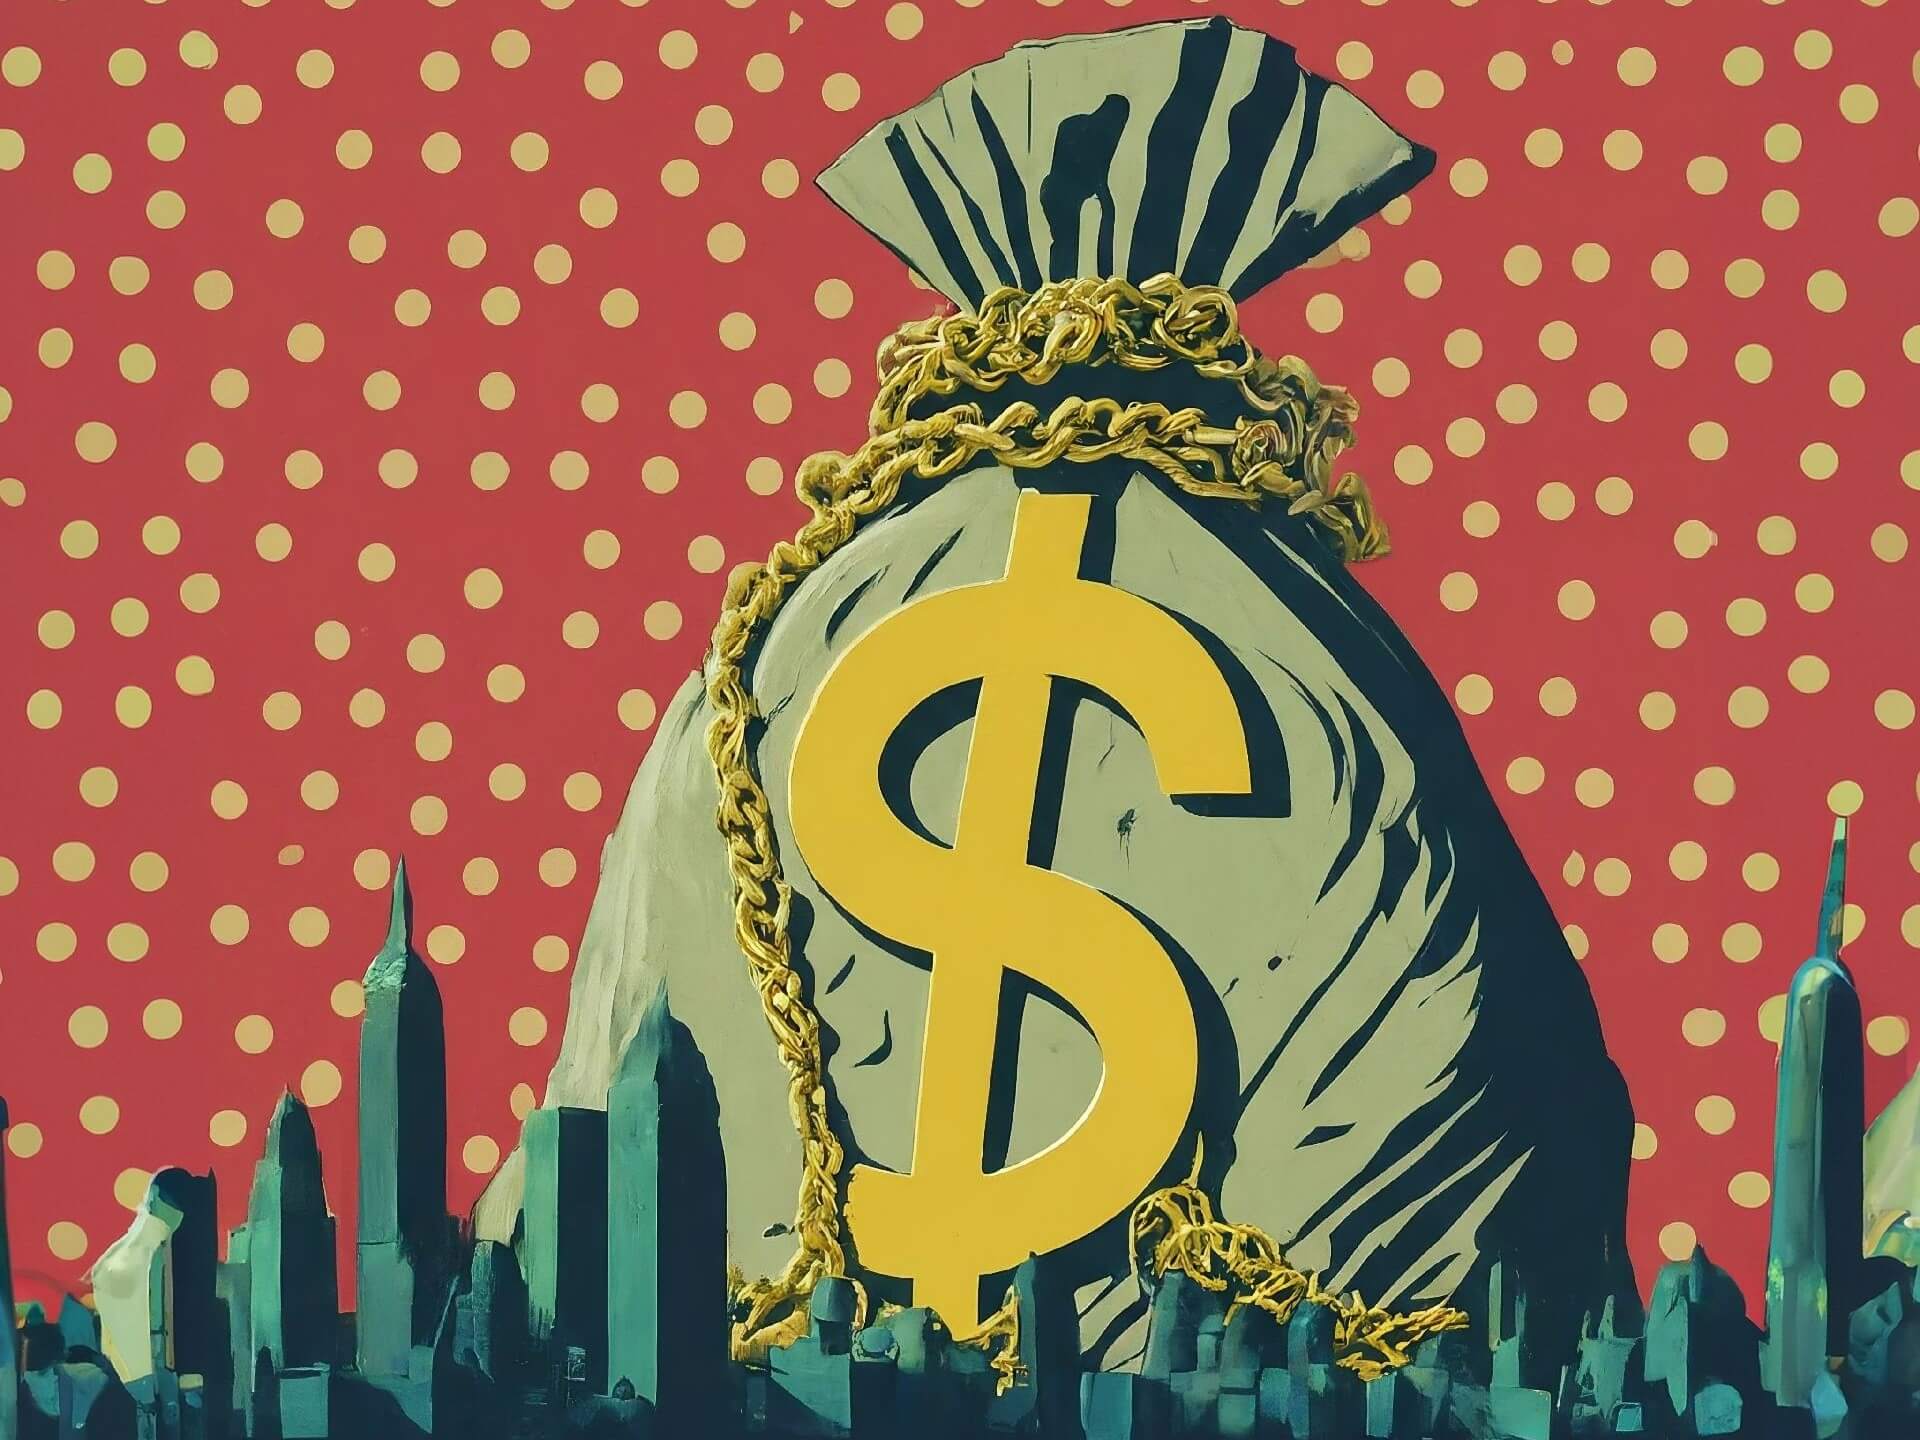 Pop art image of a giant money bag wrapped in golden chains looming over a city skyline